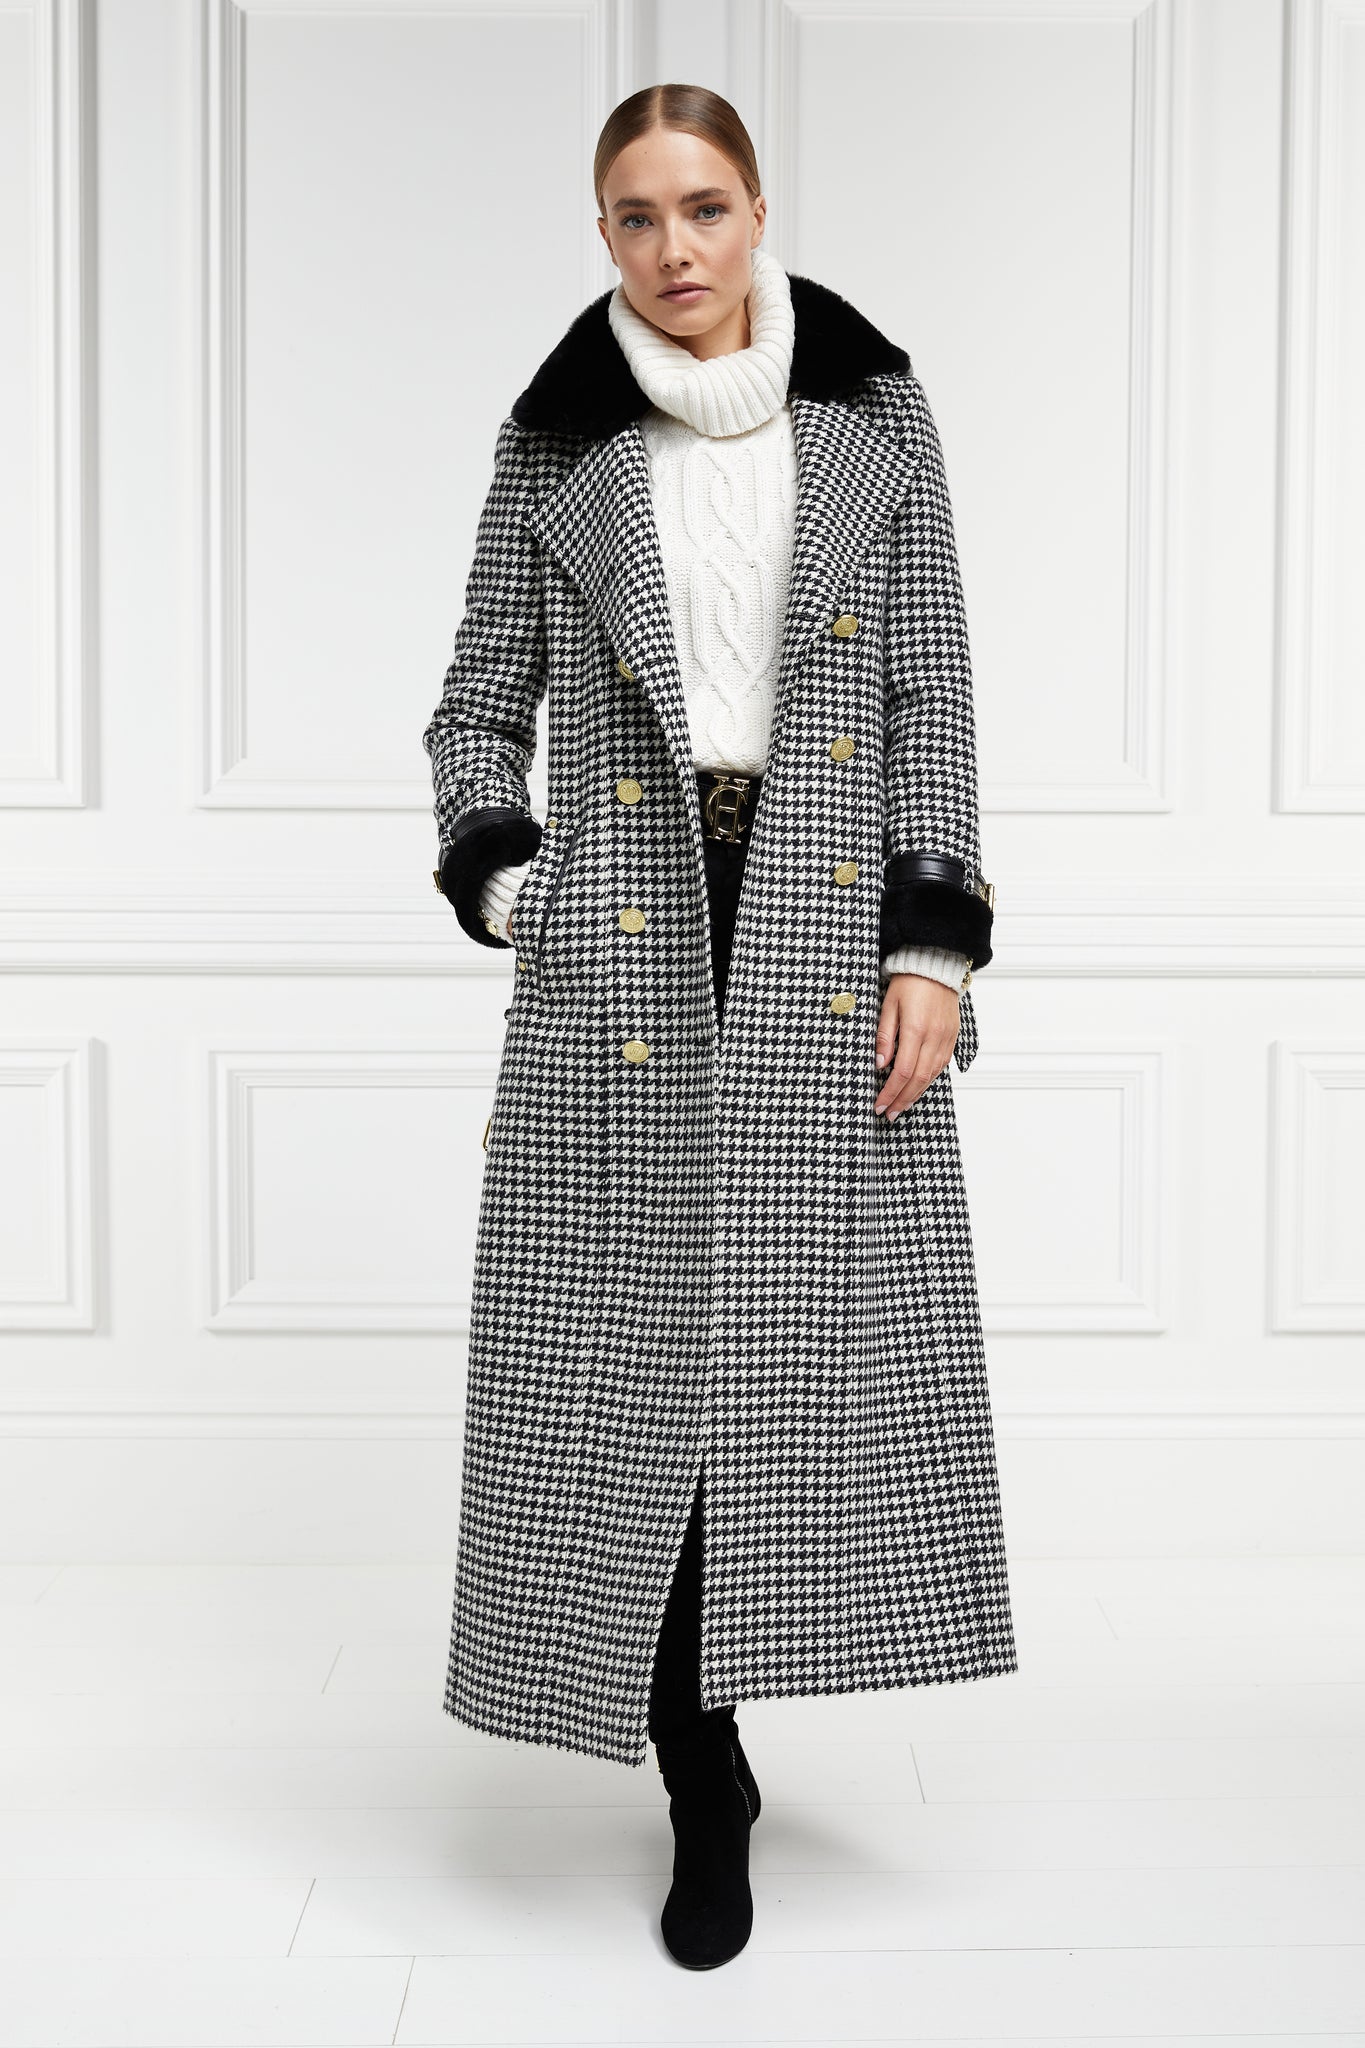 womens black and white houndstooth double breasted full length trench coat with black faux fur collar and cuffs